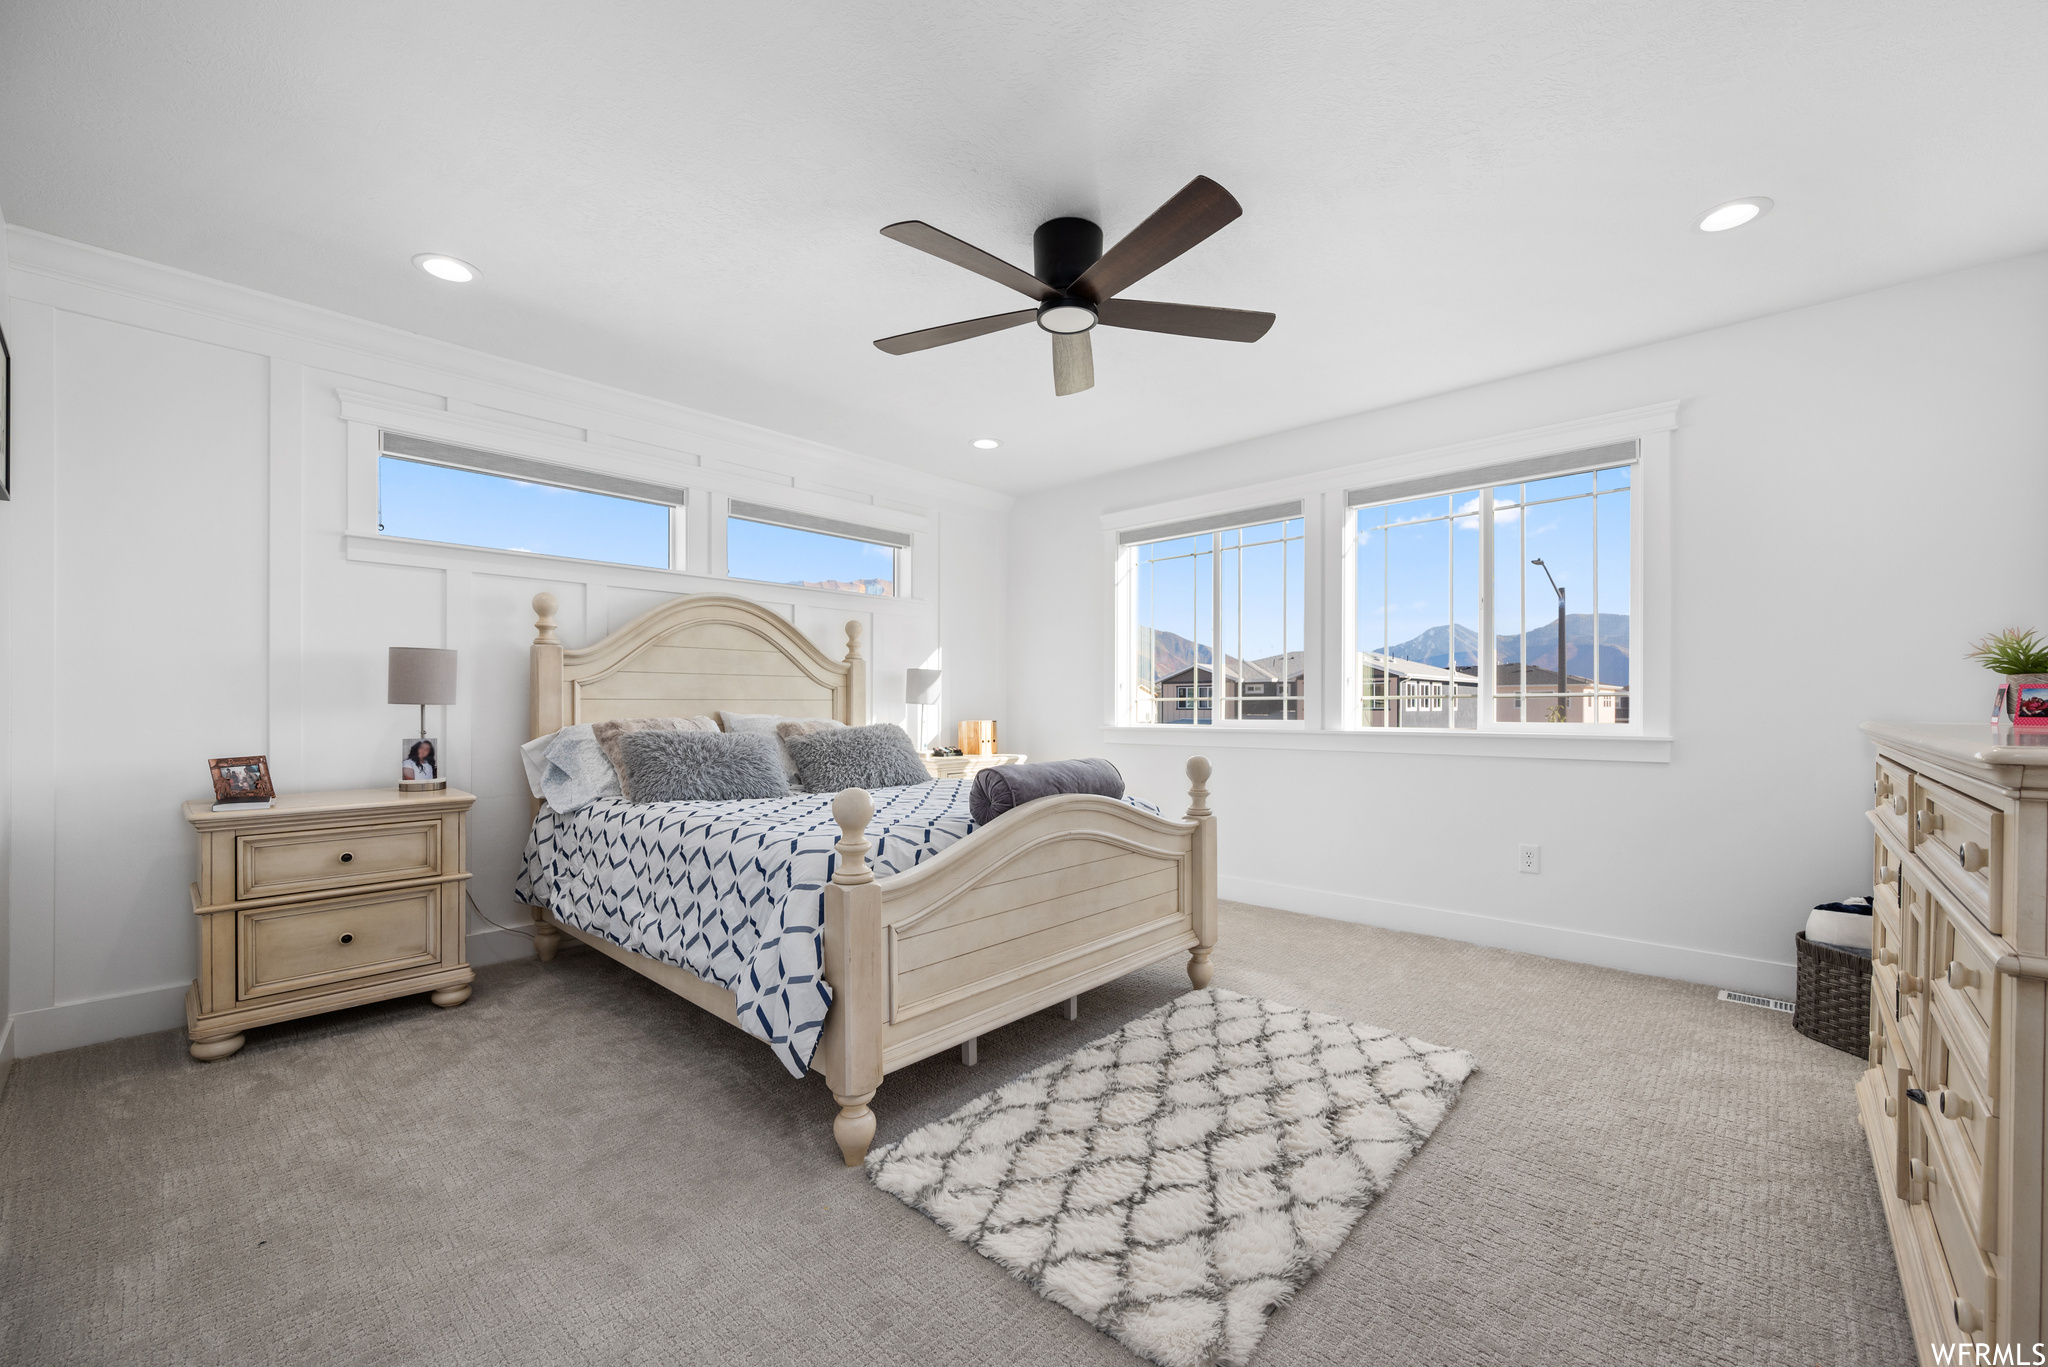 Spacious Master Bedroom with can lighting and ceiling fam.